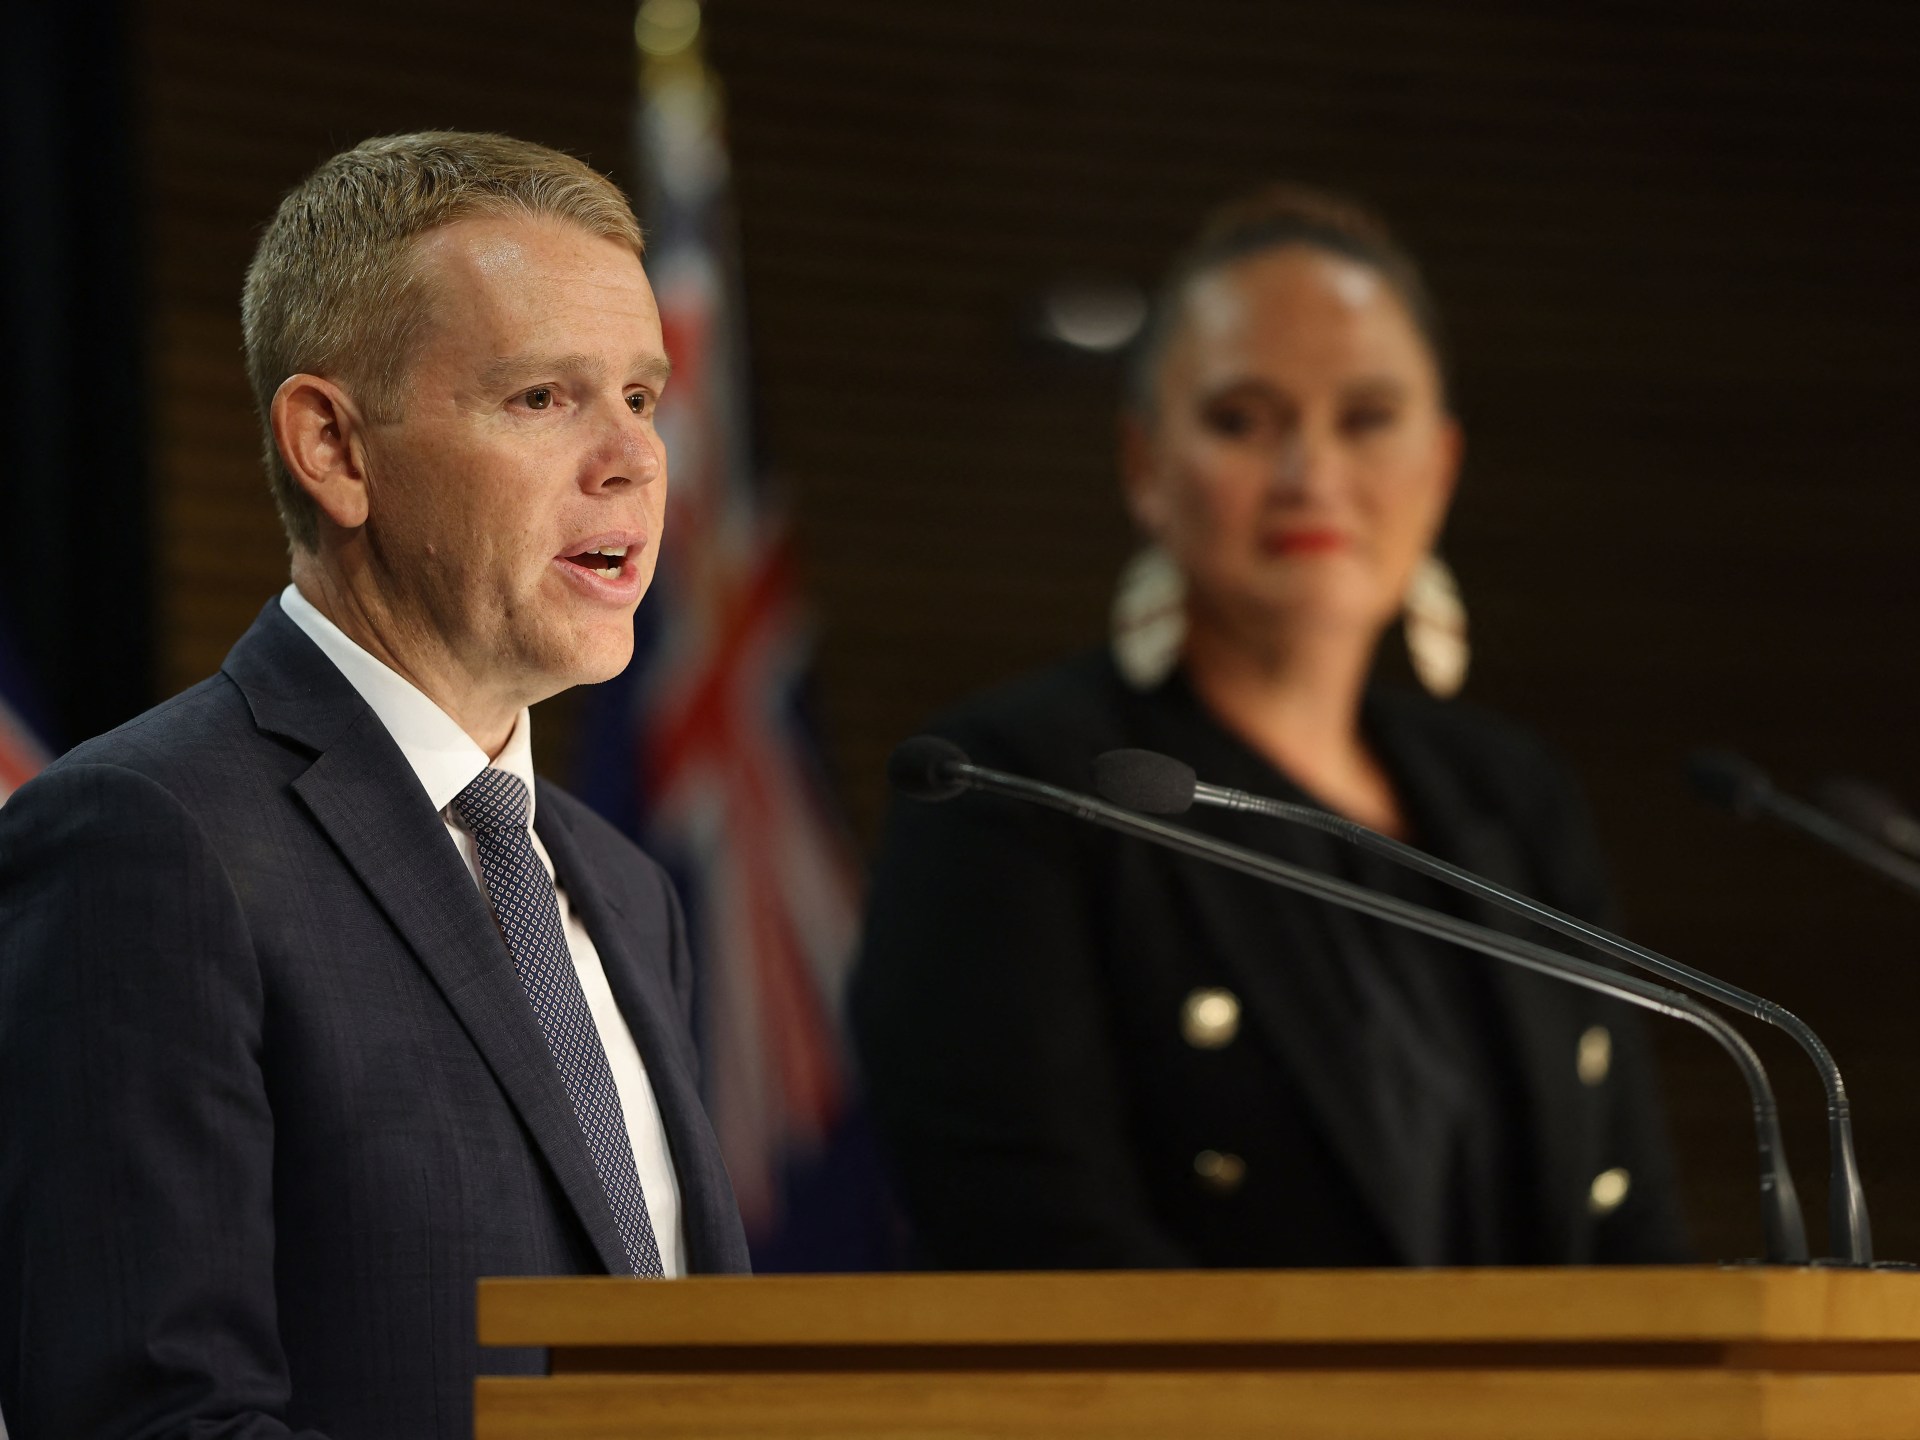 Chris Hipkins confirmed as New Zealand’s next prime minister